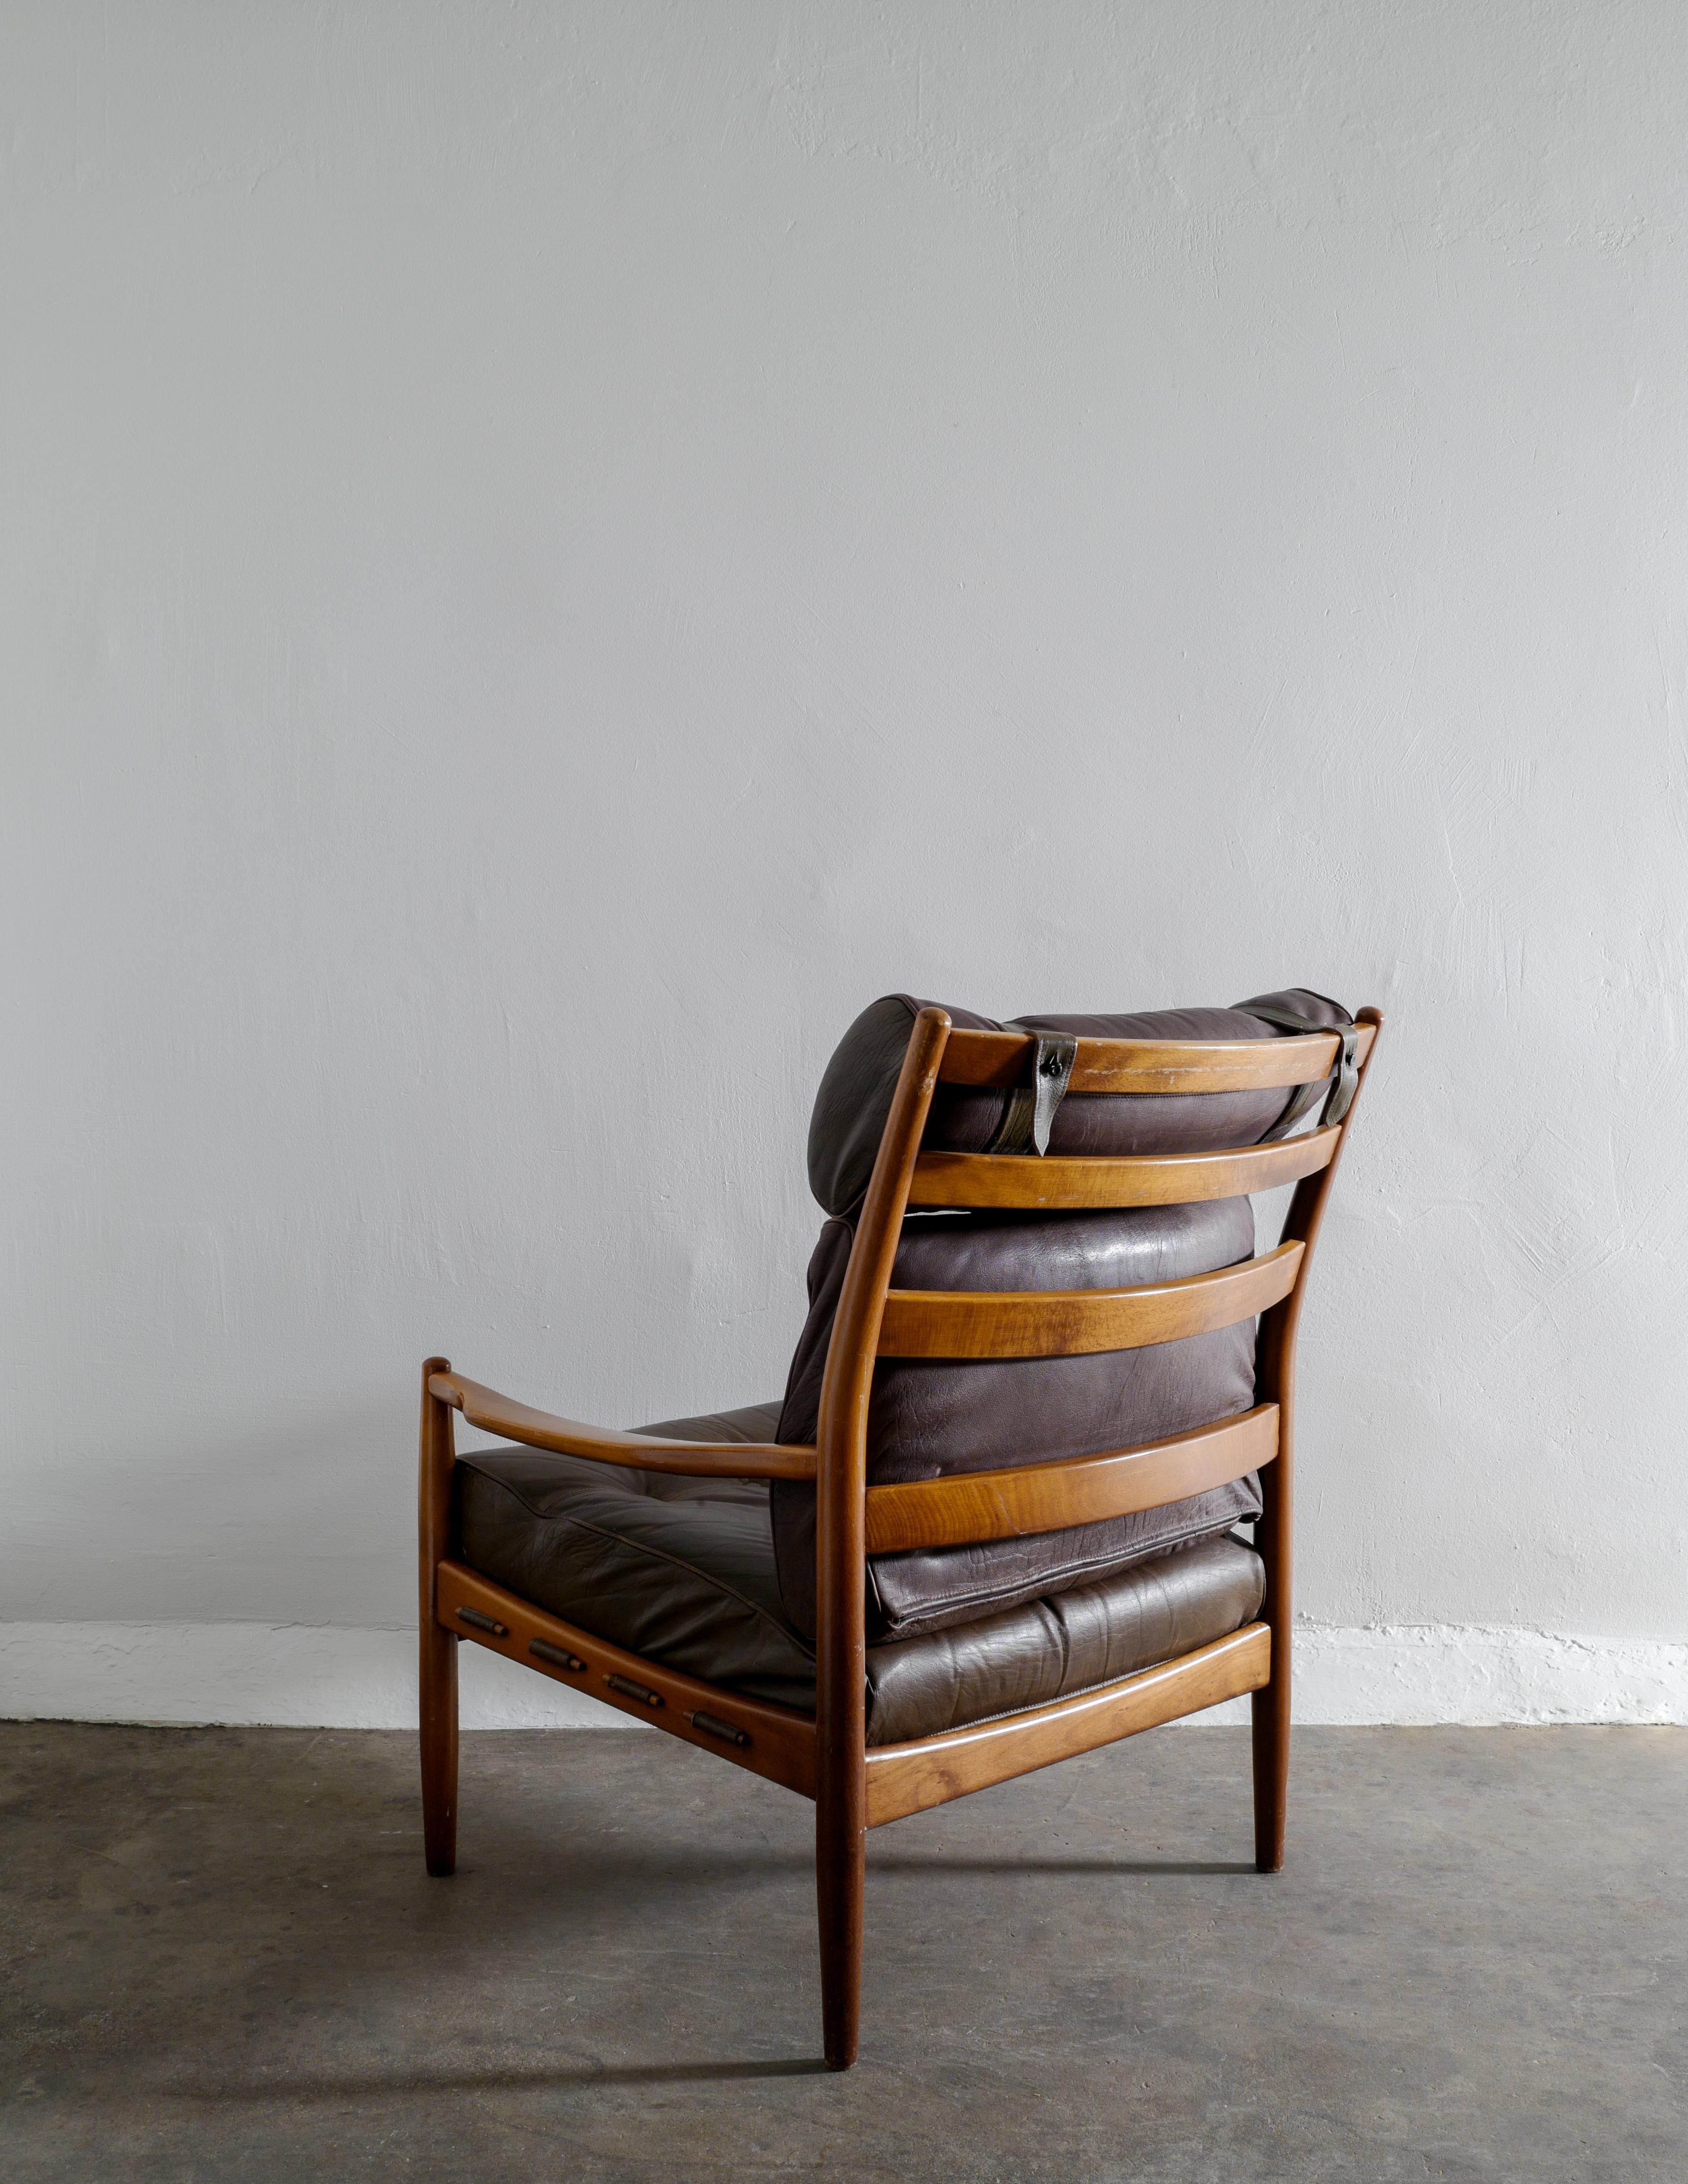 Swedish Leather Arm Easychair by Ingemar Thillmark Produced by OPE Möbler, Sweden, 1960s For Sale